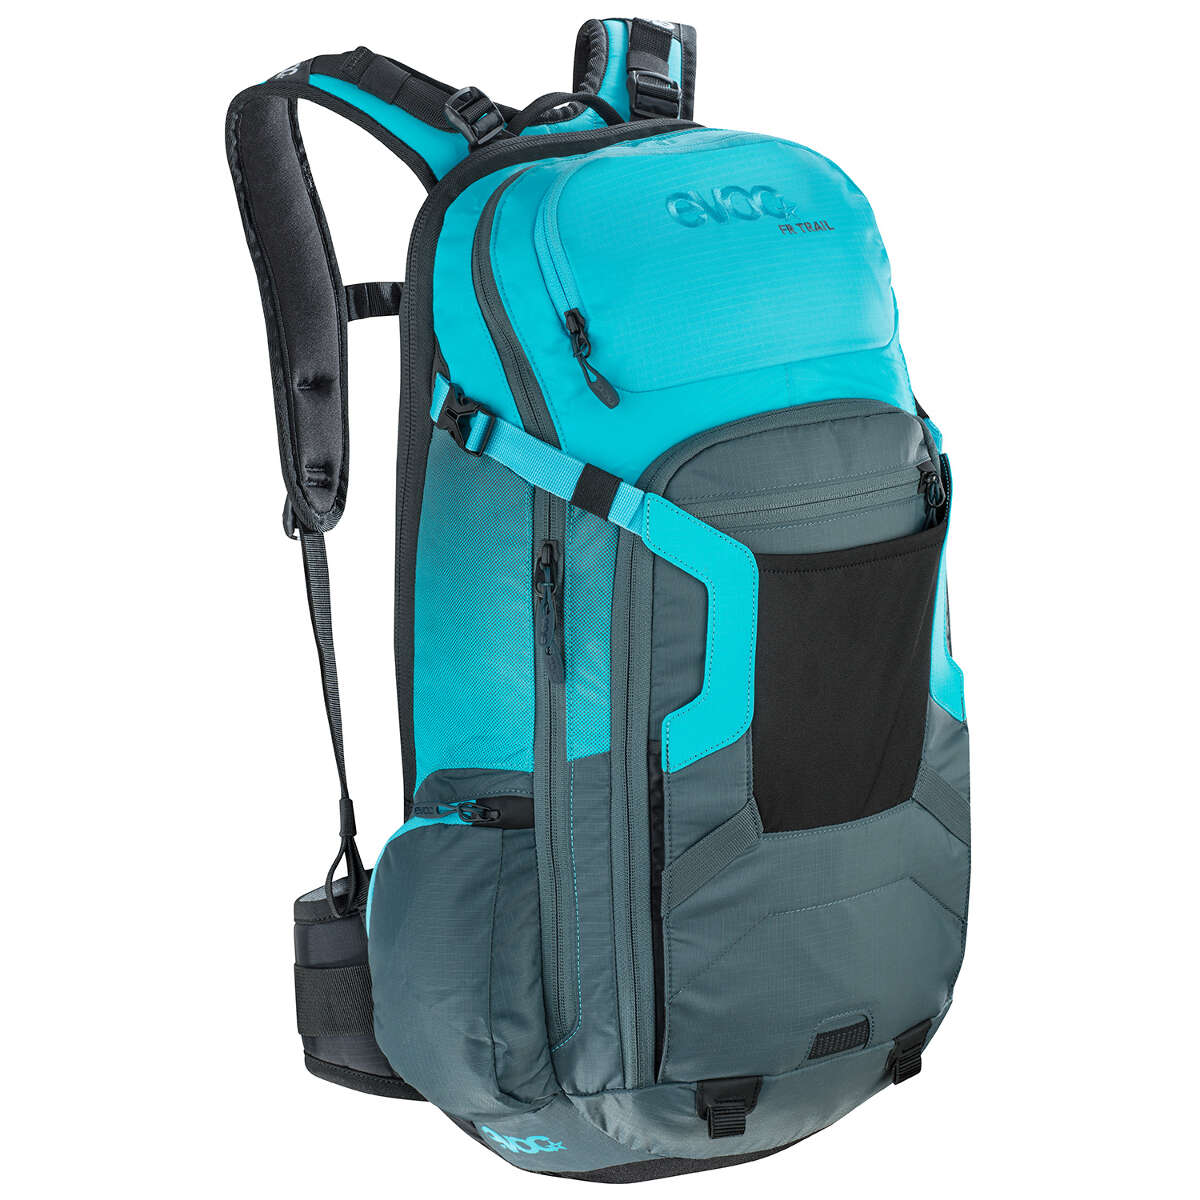 Evoc Protector Backpack with Hydration System Compartment FR Trail Neon Blue, 20 Liter